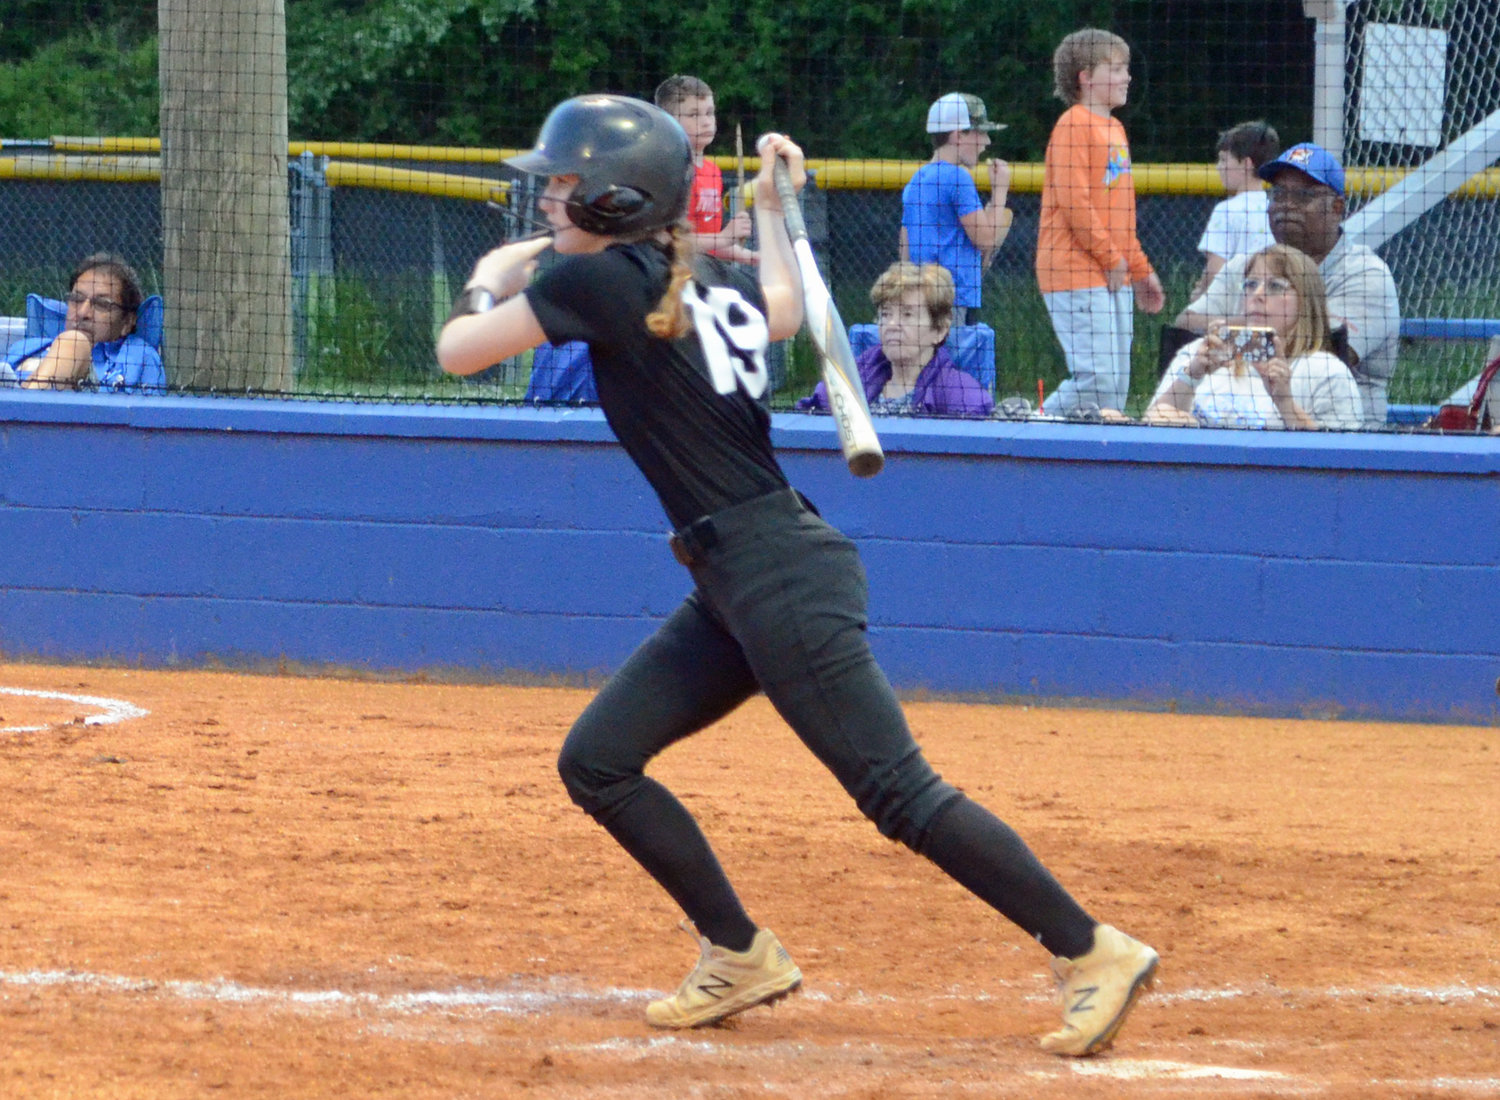 Alicia Polk went 2-for-3 with two RBIs and scored a run versus the Tigerettes.